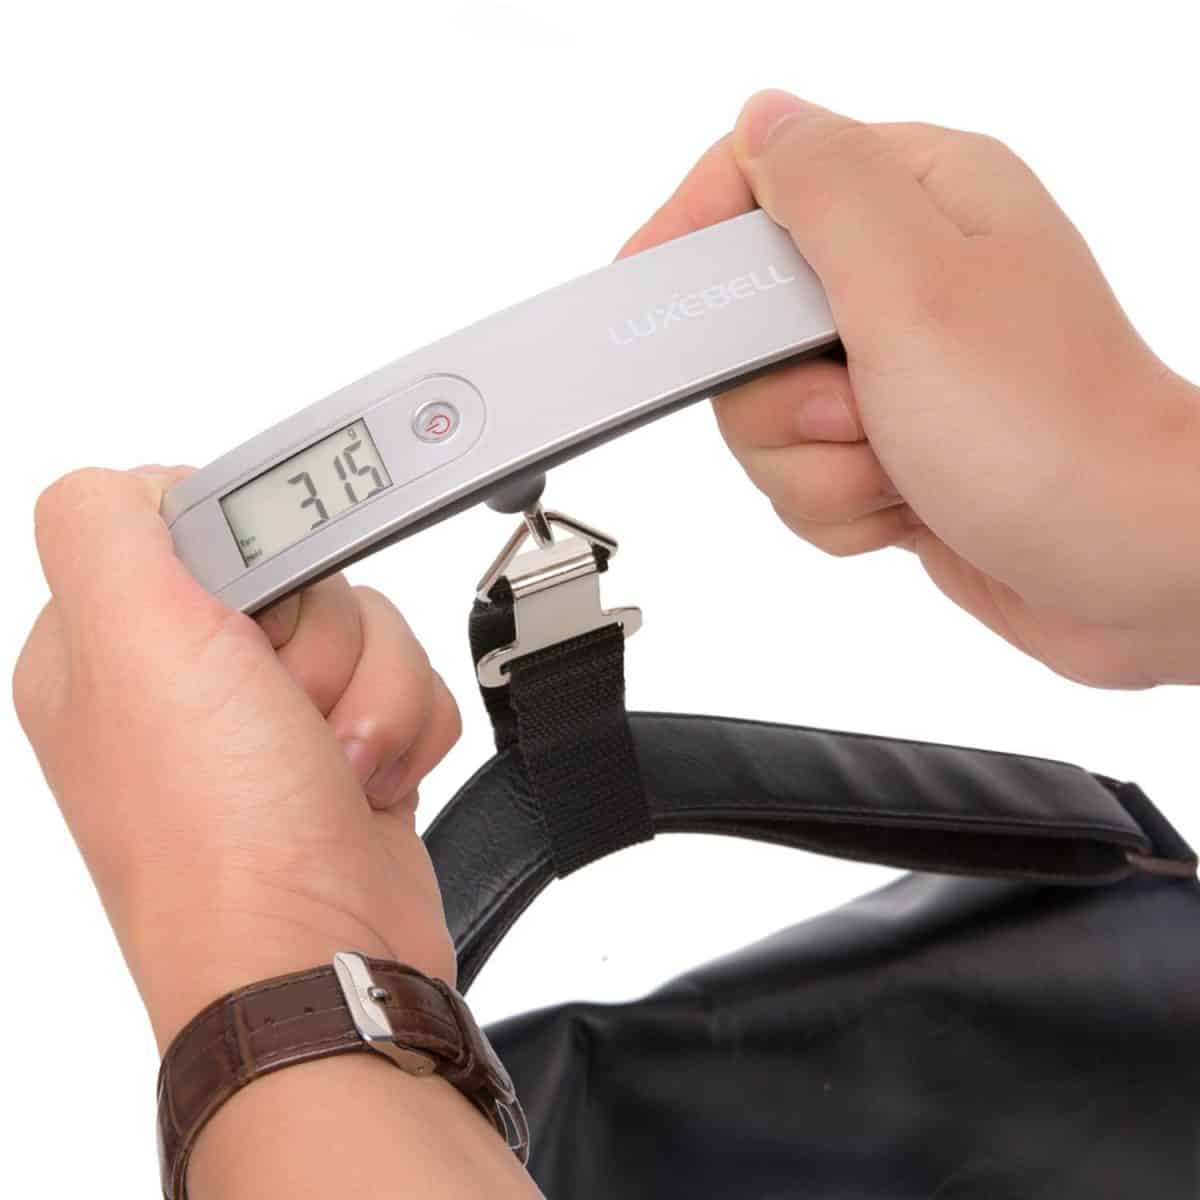 Luxebell Digital Luggage Scale | Get These Tech Gadgets Via Amazon Prime